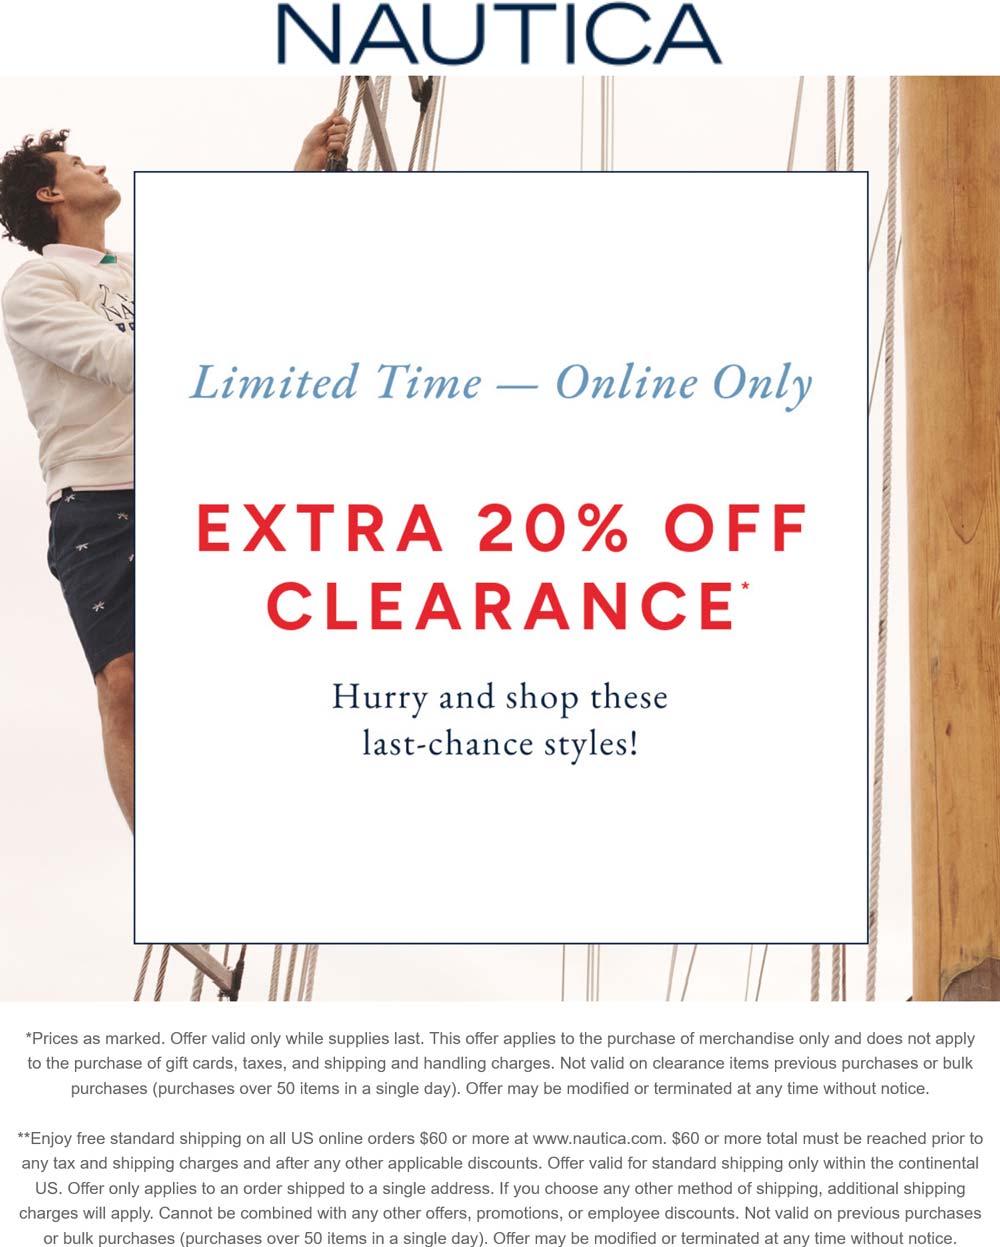 Nautica stores Coupon  Extra 20% off clearance online at Nautica #nautica 